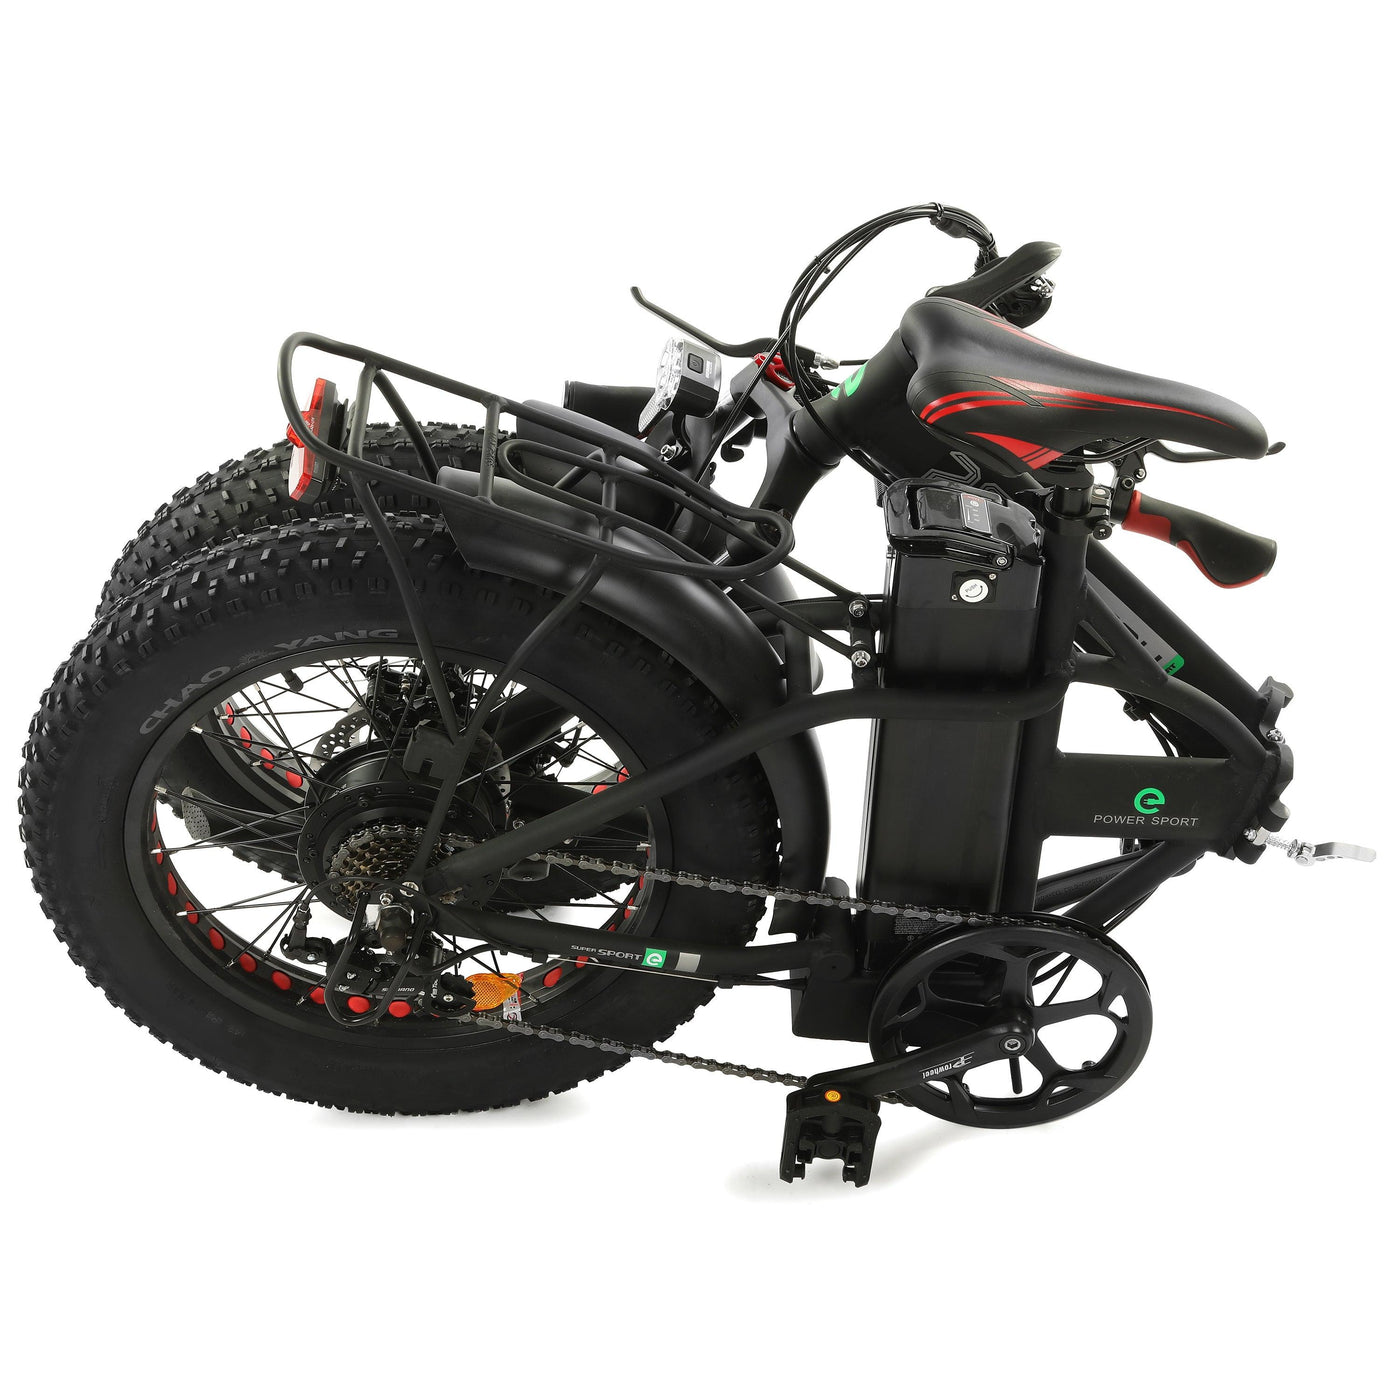 Ecotric 48V 15AH Black Foldable Fat Tire Electric Bicycle Folded View